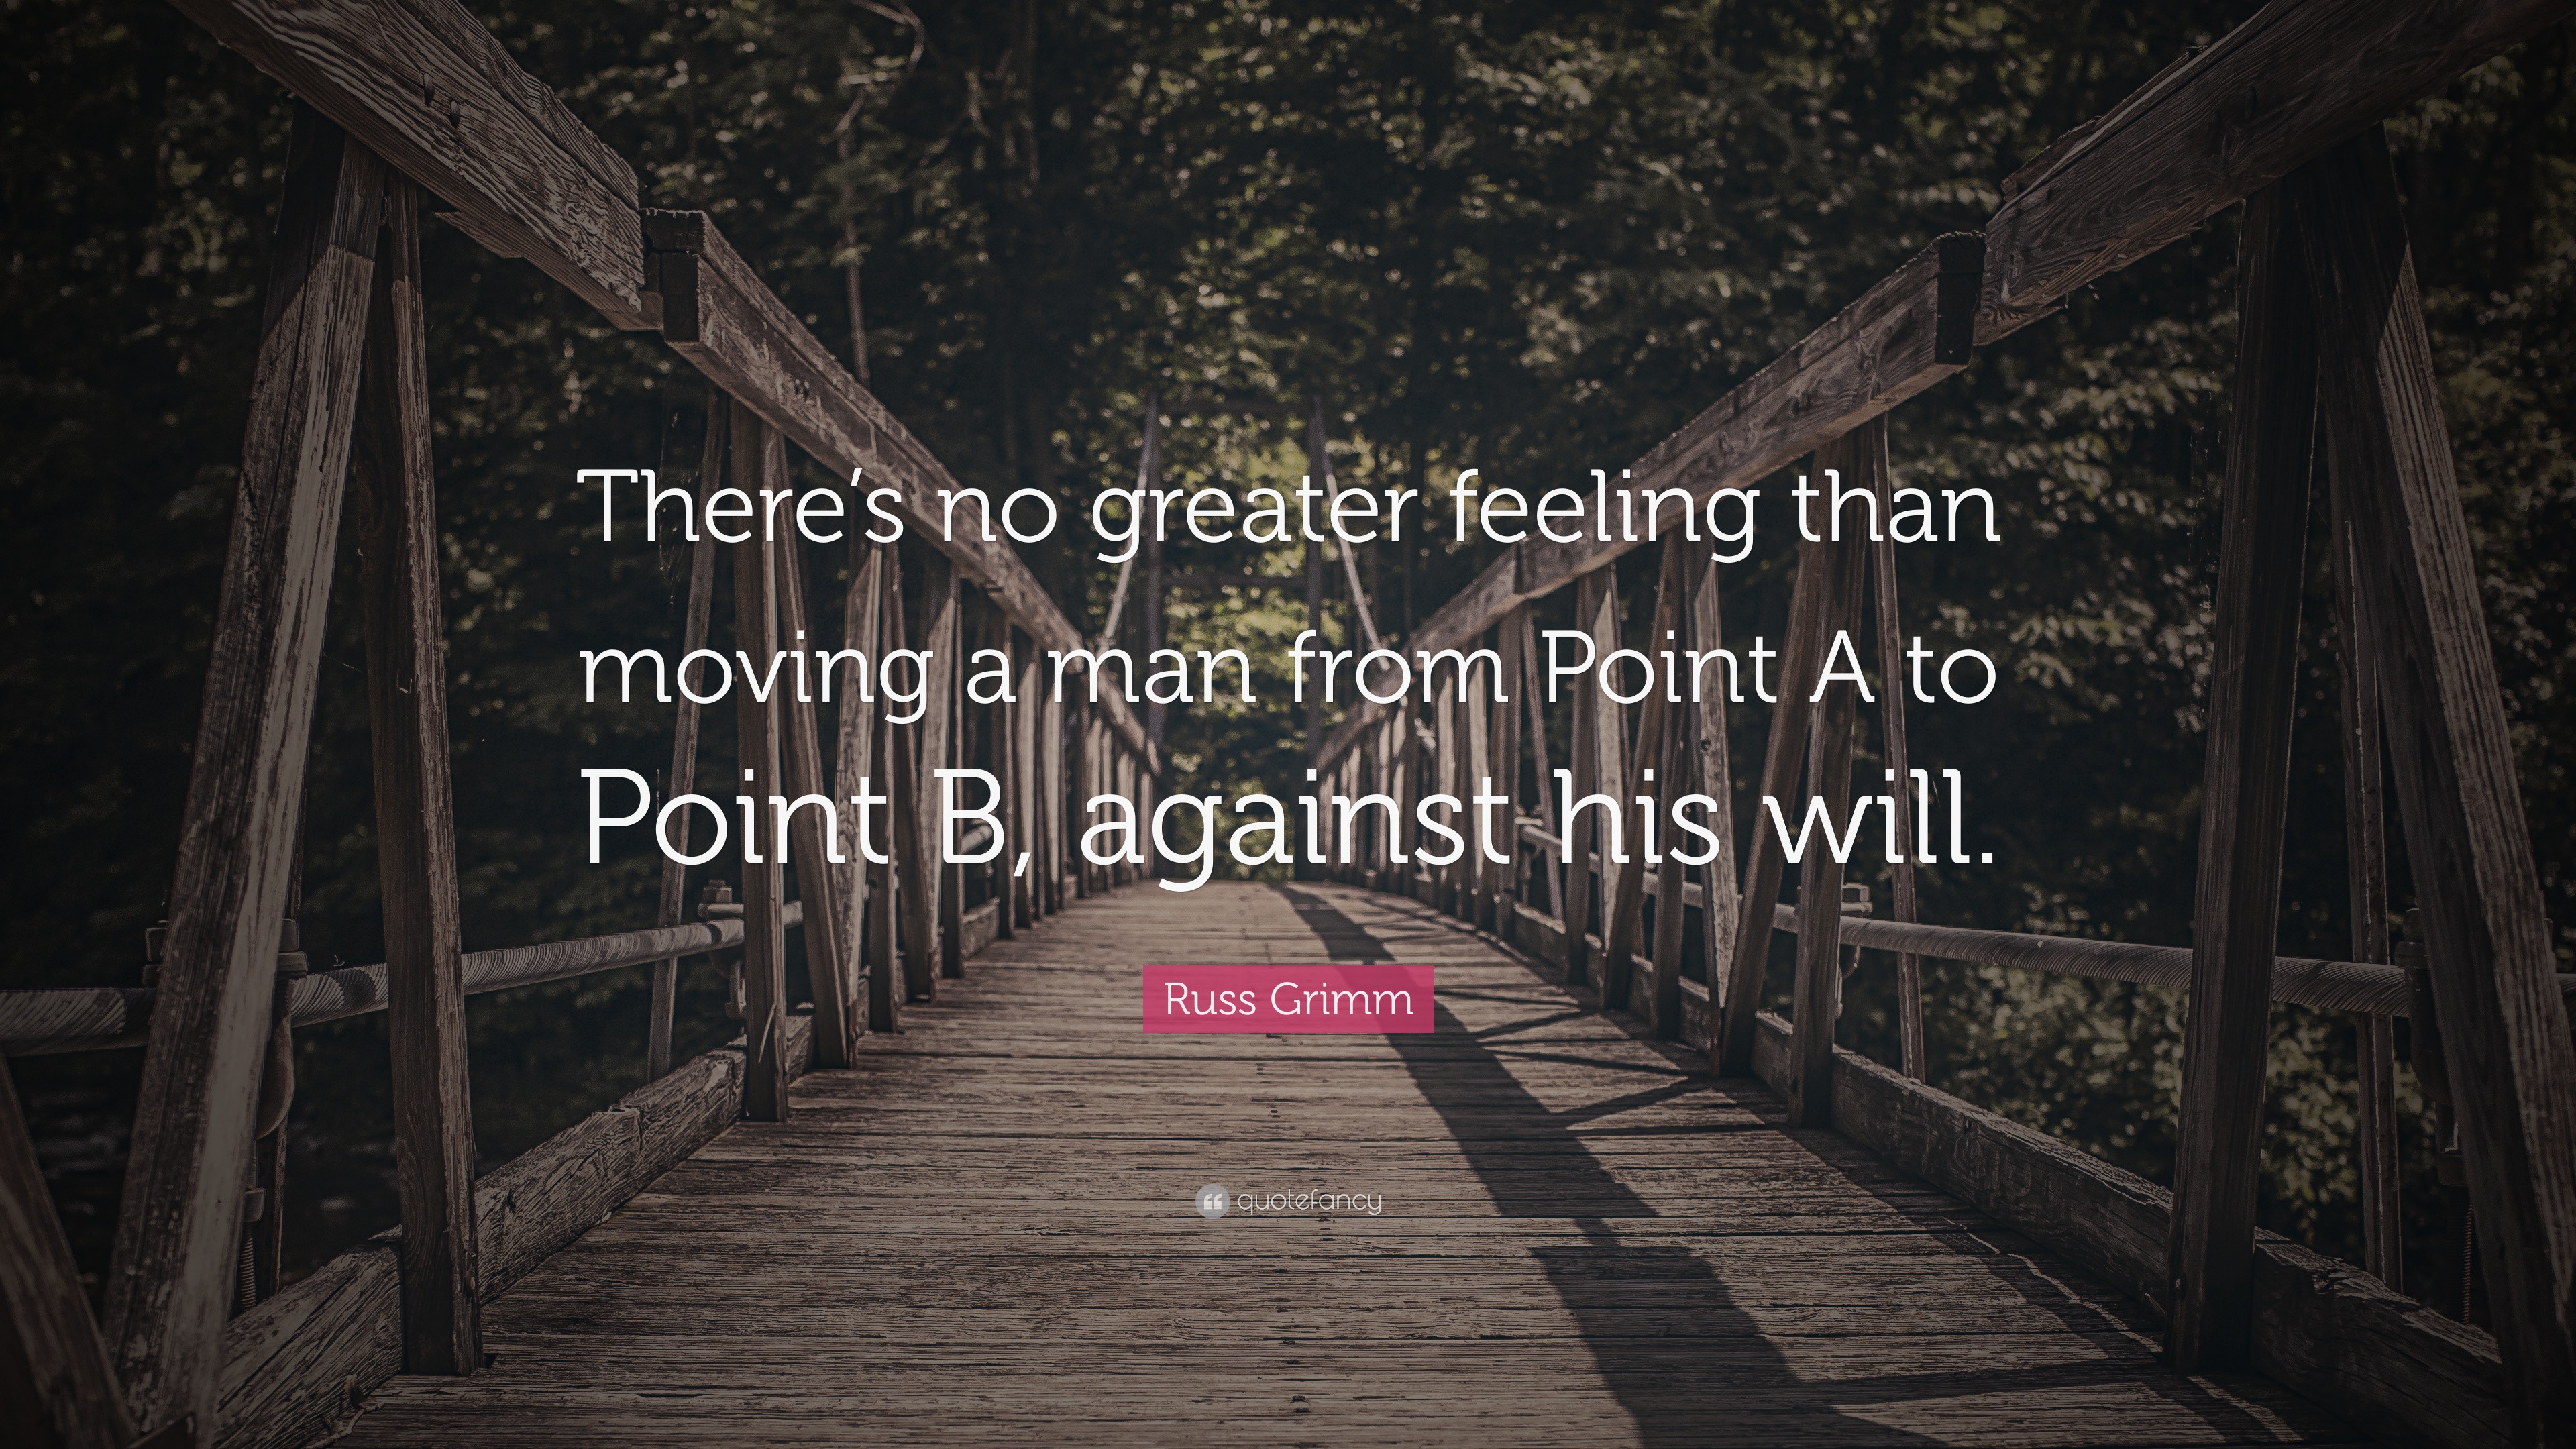 Russ Grimm Quote: "There's no greater feeling than moving a man from Point A to Point B, against ...